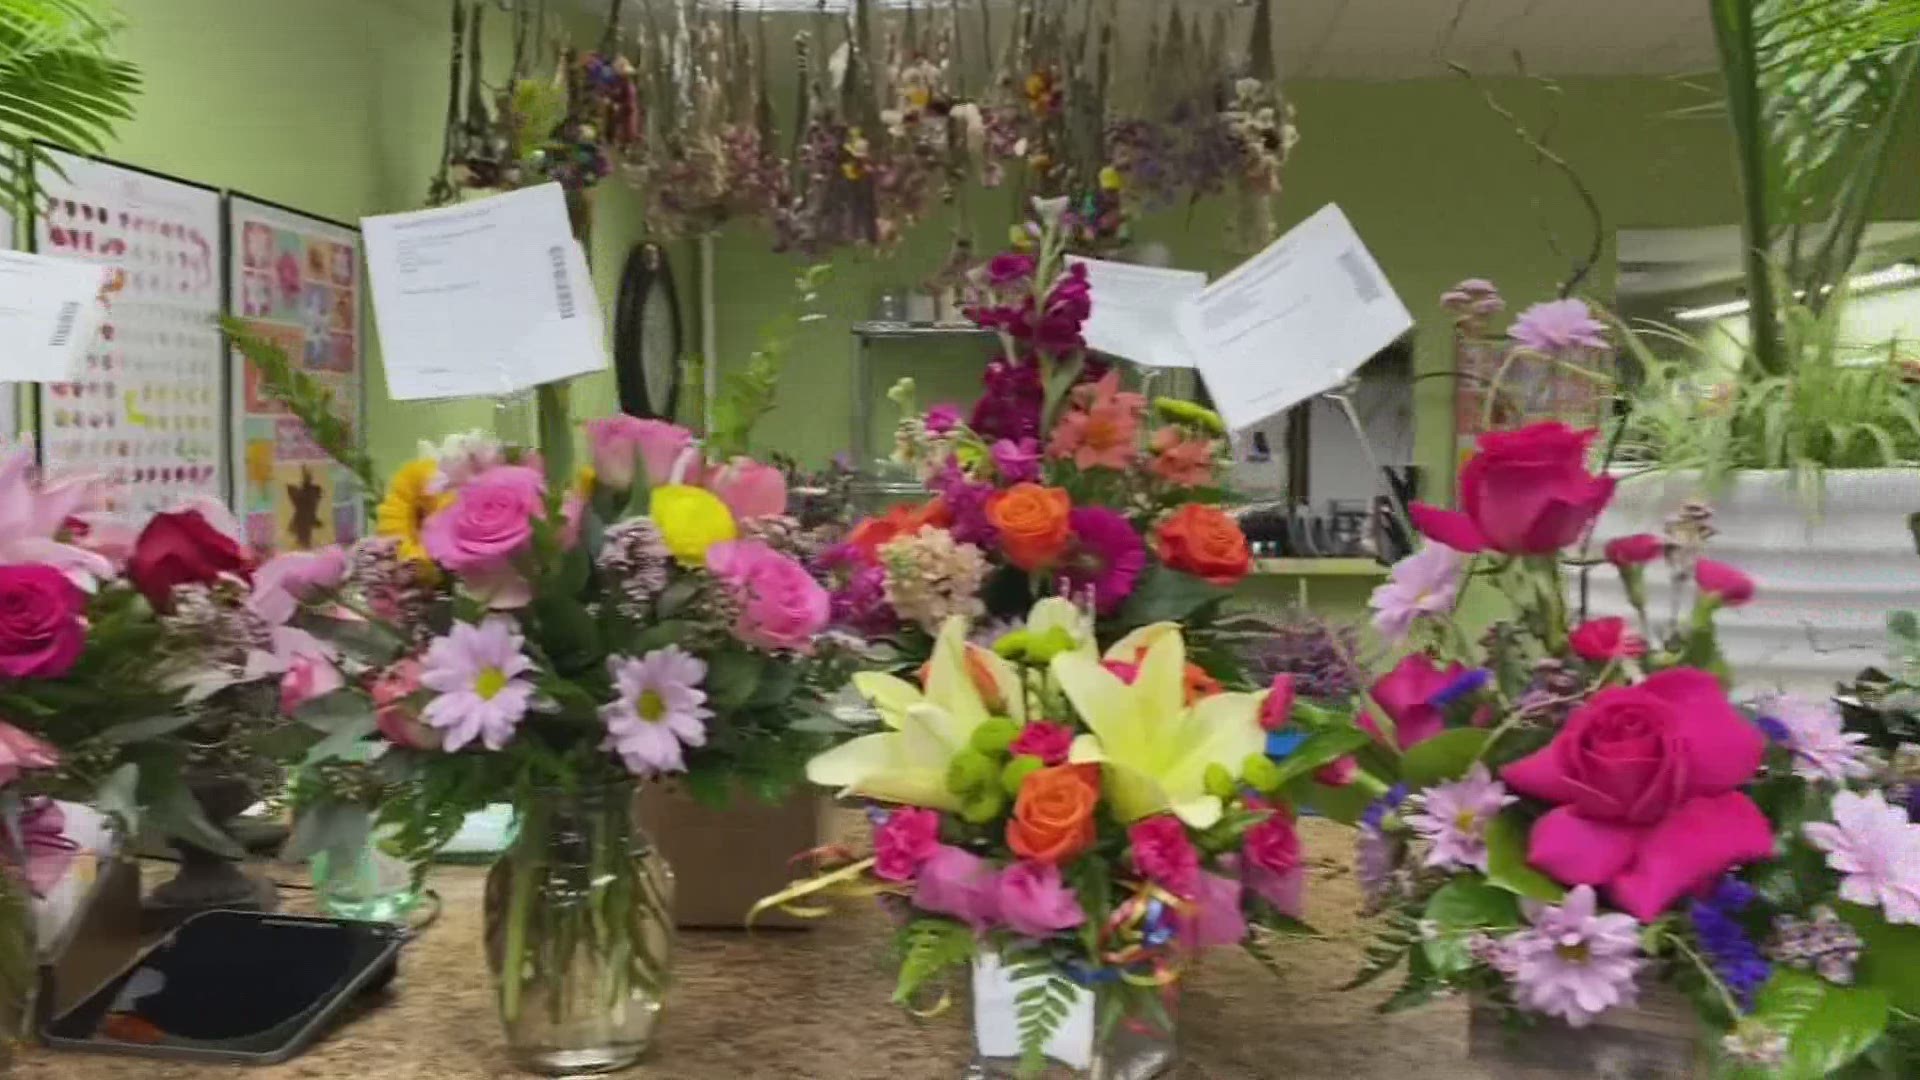 As Mother's Day approaches, florists around Maine are still hopeful despite the effect COVID-19 has had on business